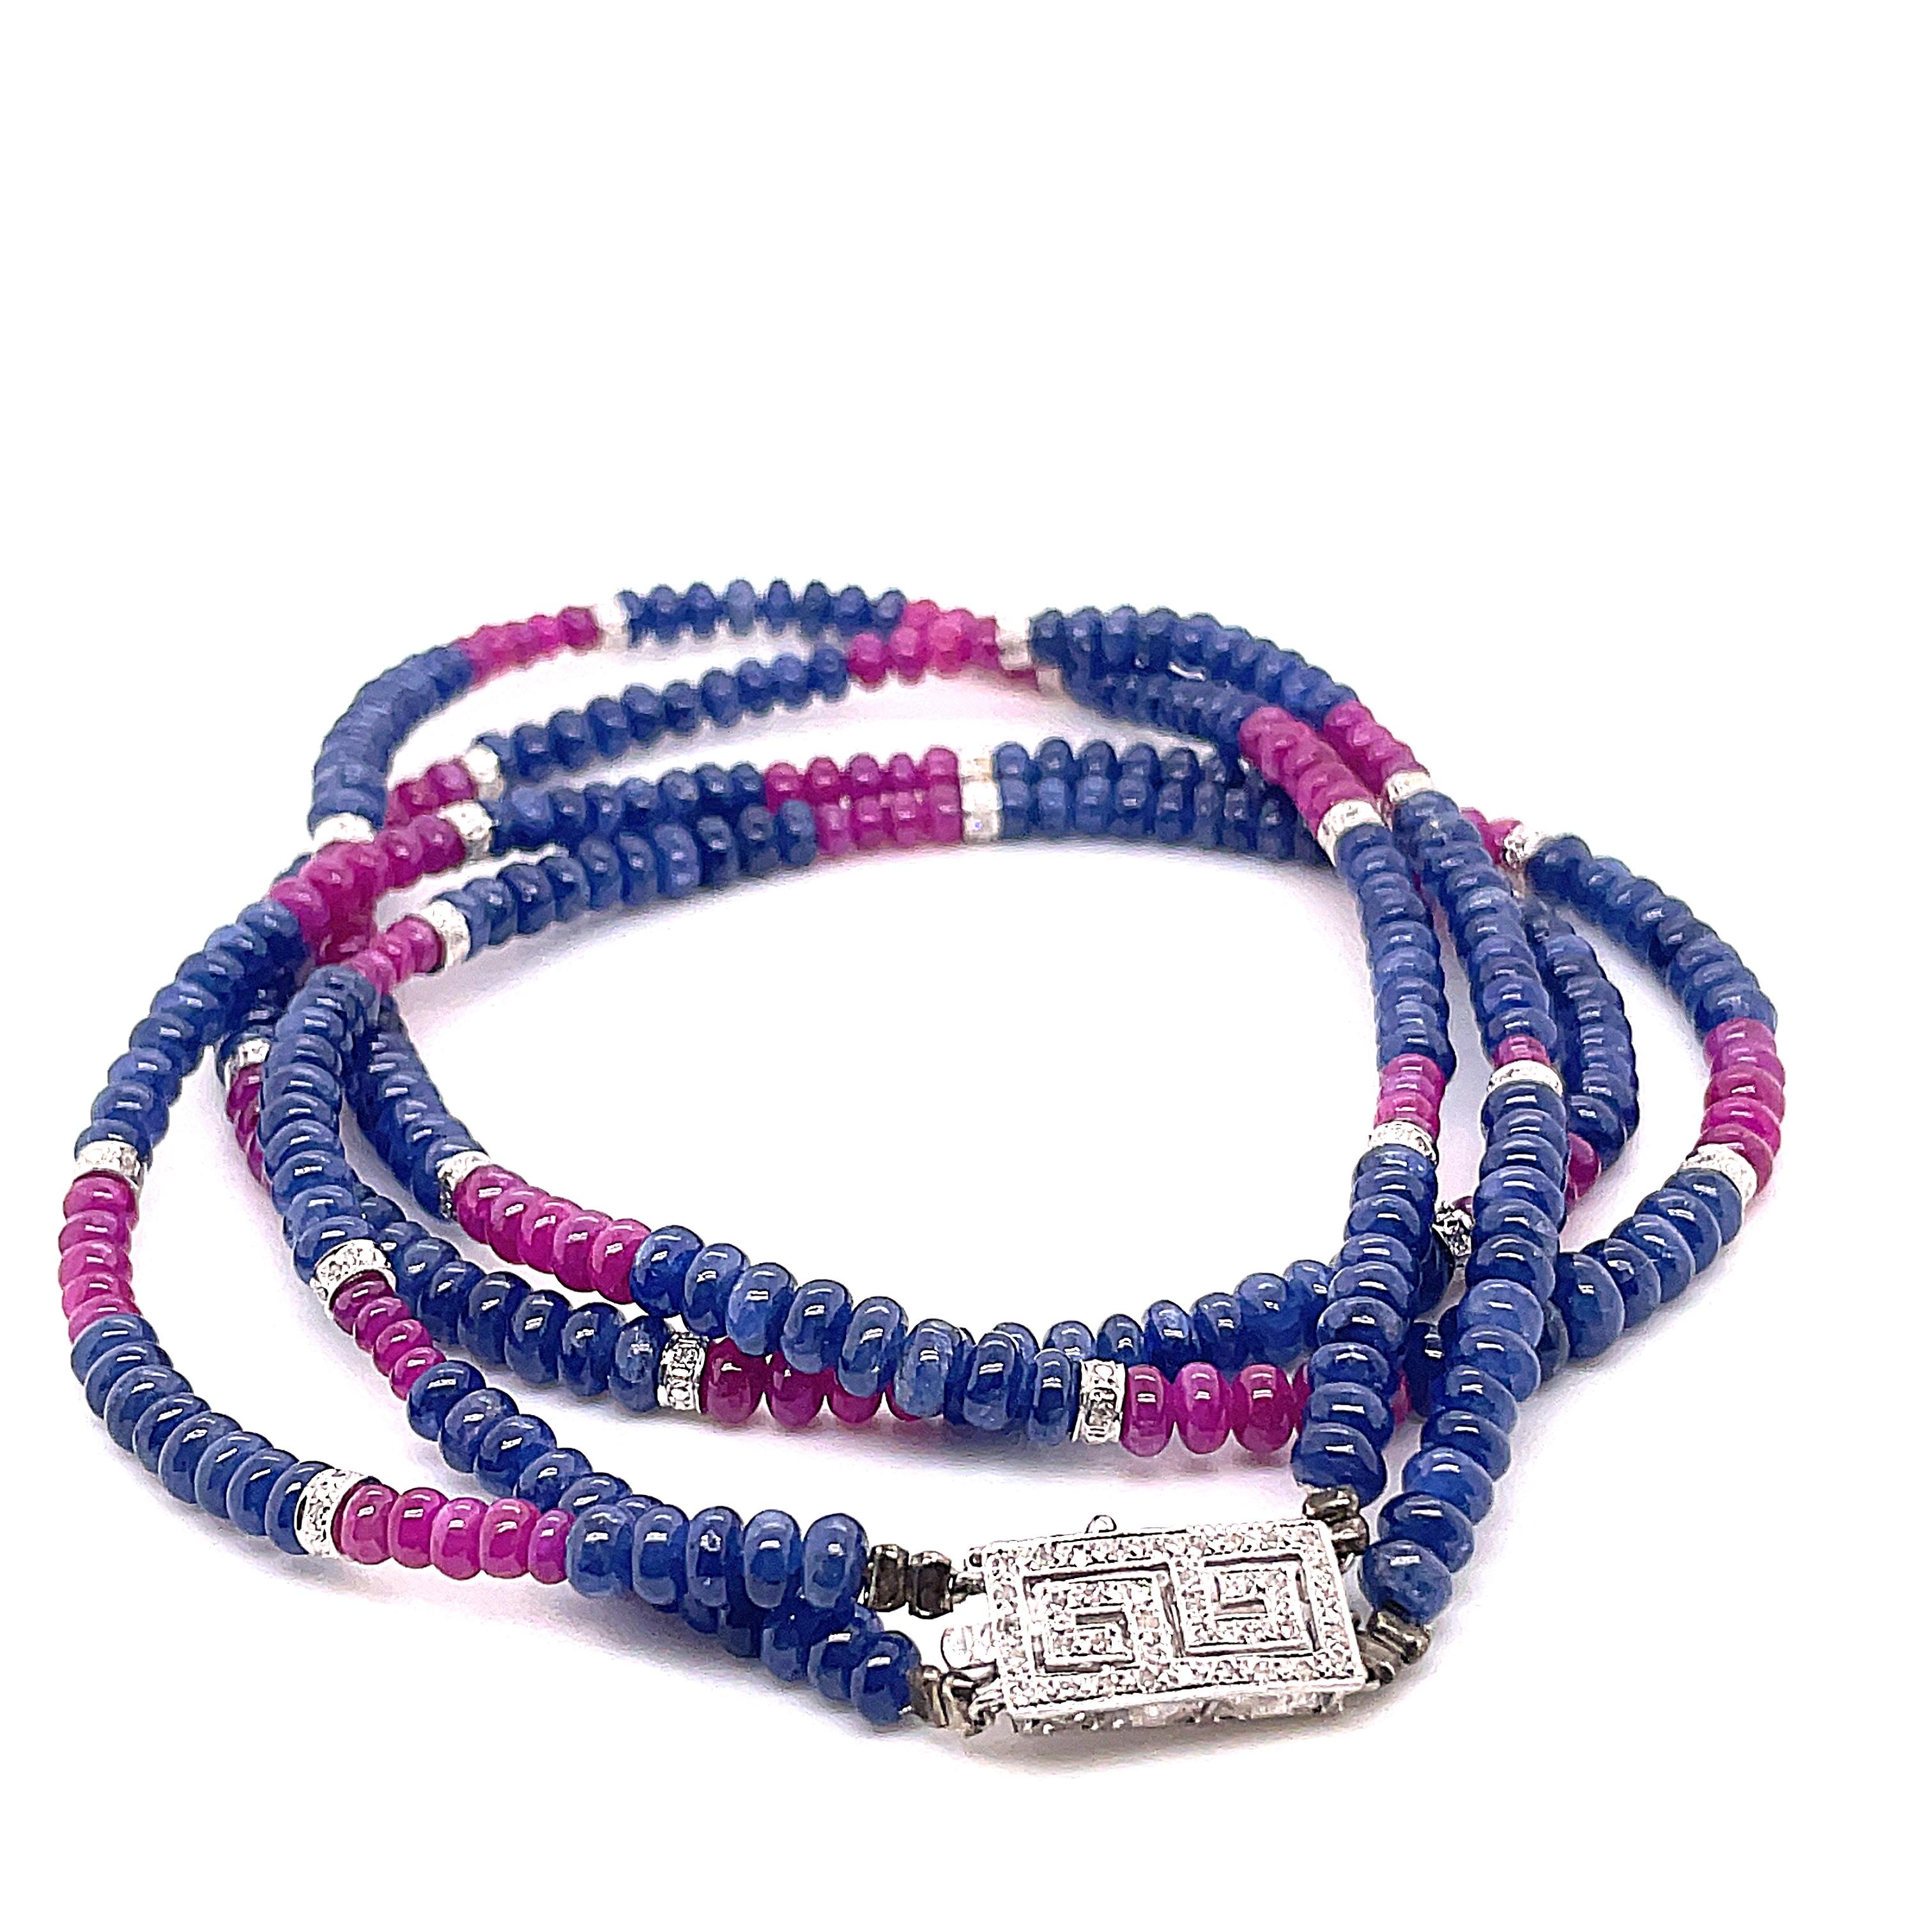 Burmese Ruby and Sapphire Beads White Diamond Gold Necklace

Intricate and captivating, our Burmese Ruby and Blue Sapphire White Gold Necklace is a testament to nature's treasures.

With heated Burmese Ruby Beads and unheated Blue Sapphire Beads